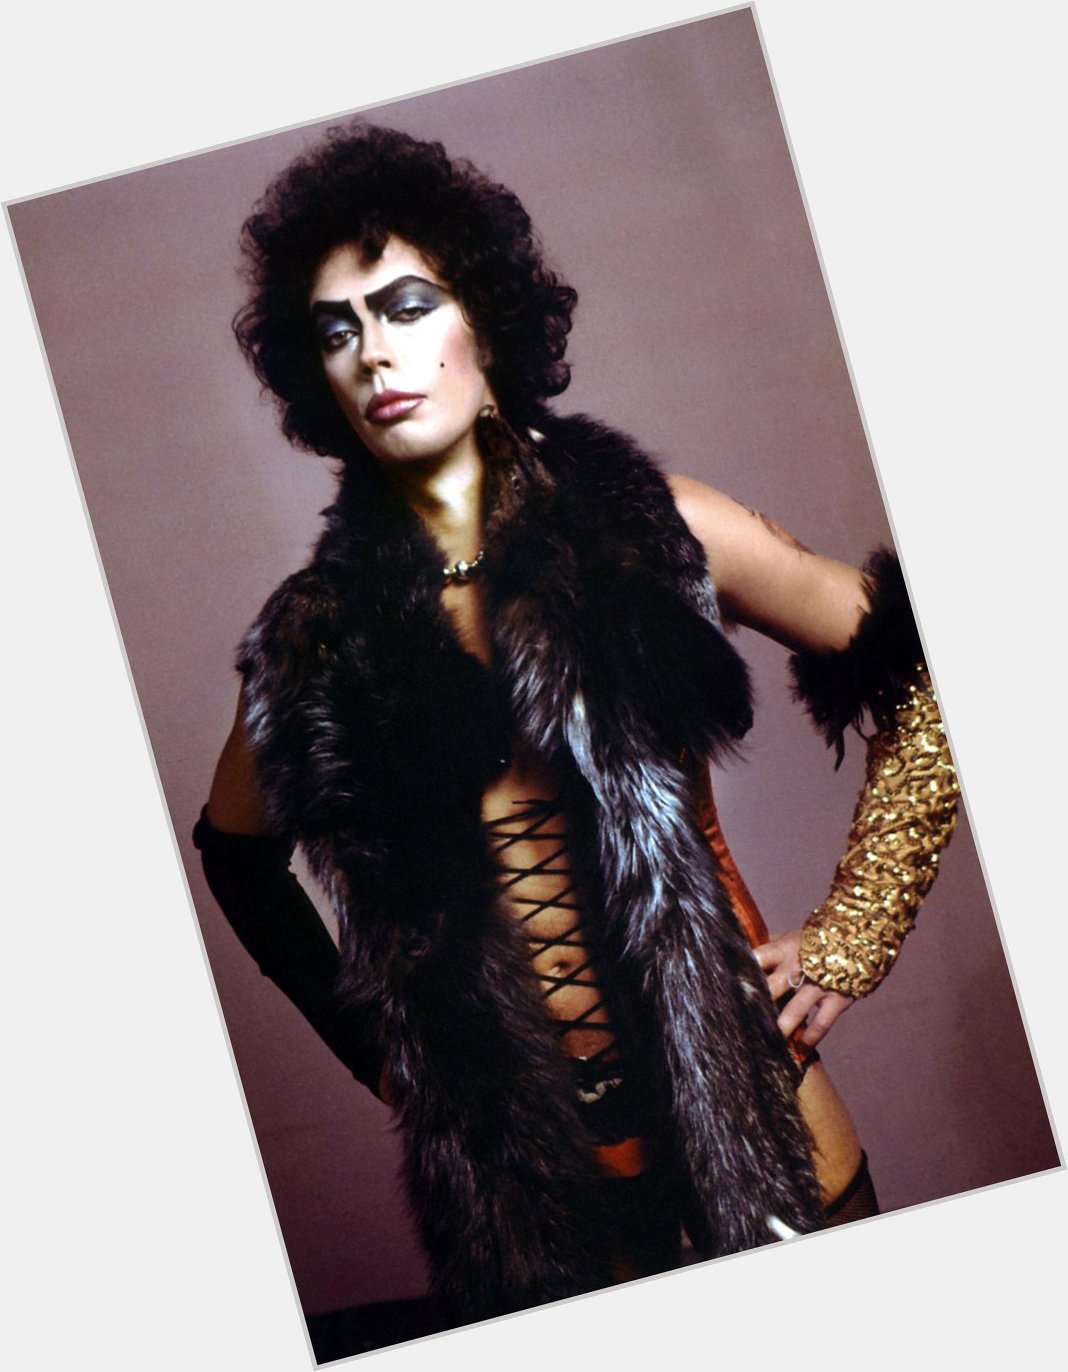 Tim Curry a very happy 73rd birthday to a legend of our screens 